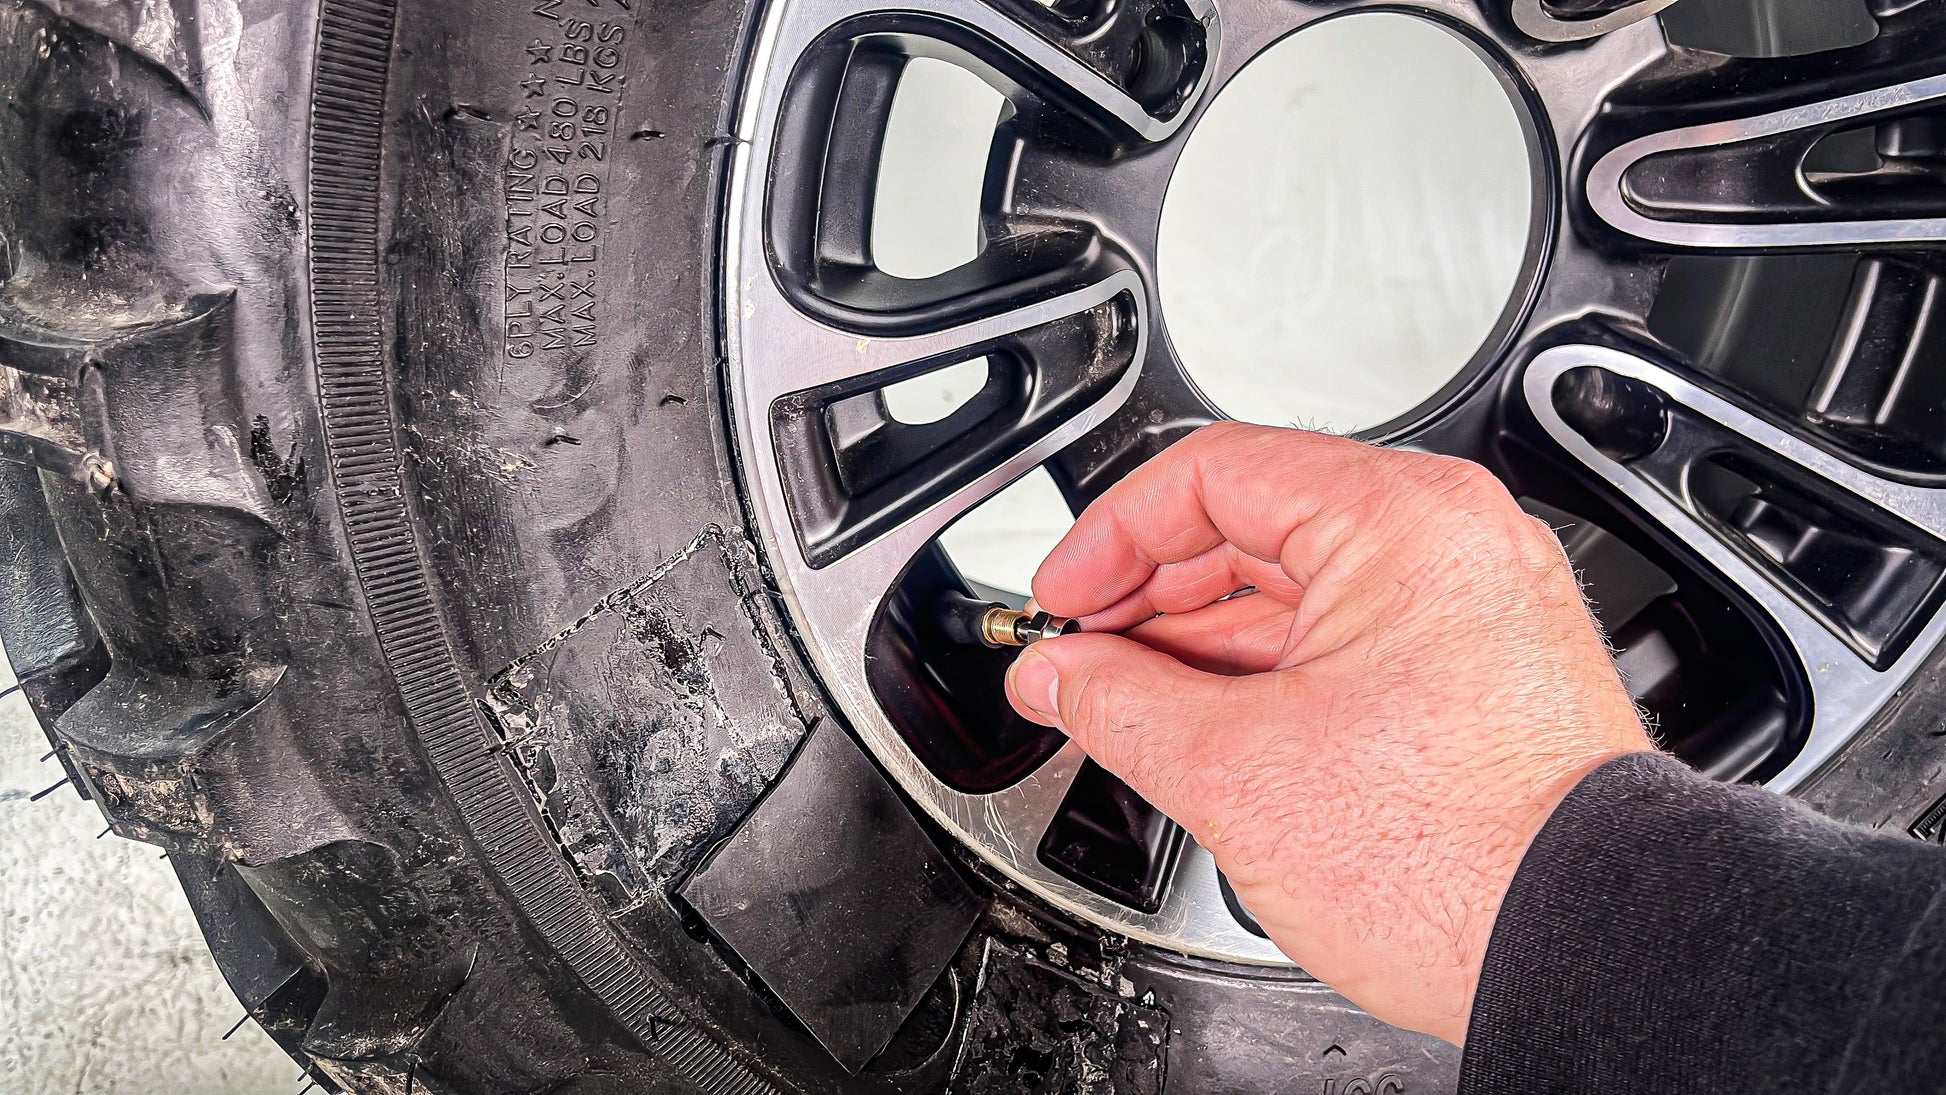 RV Tire Safety: Is sealant a good fix for a flat tire? - RV Travel